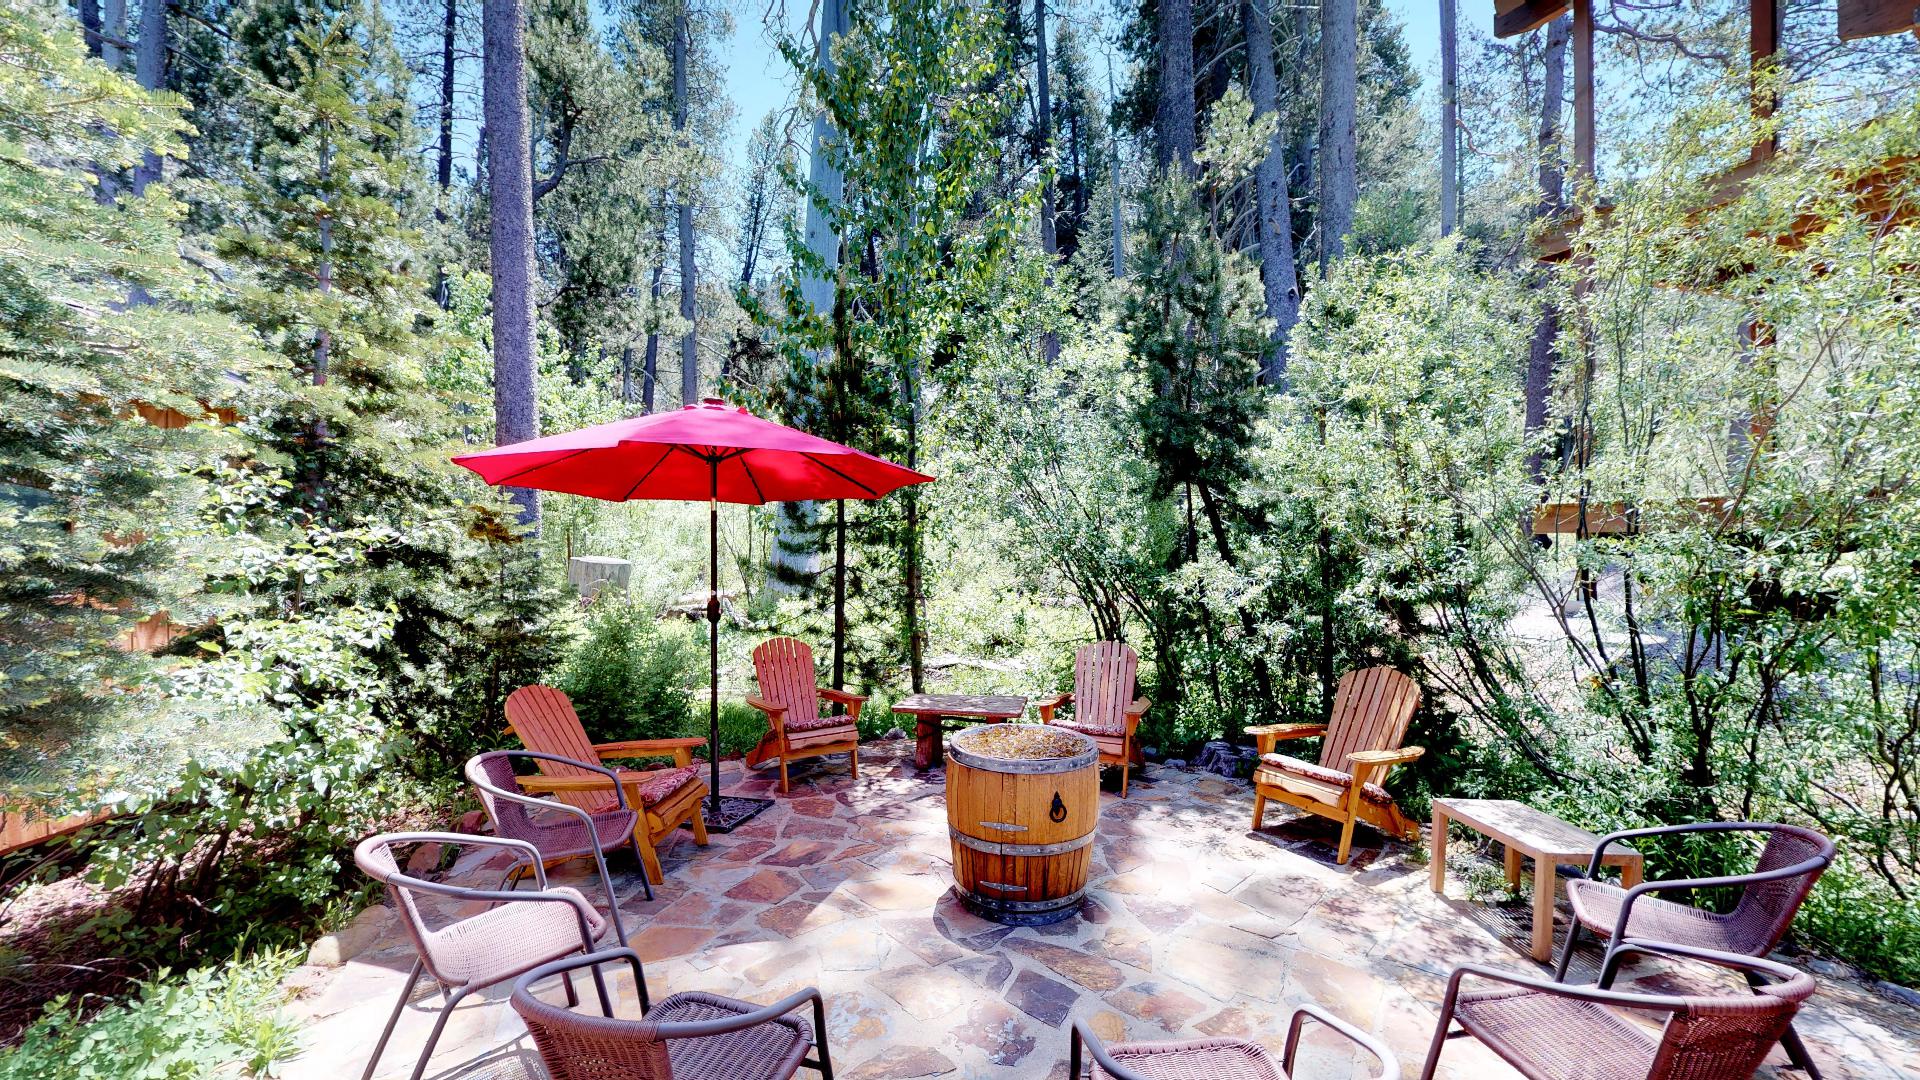 Fire Pit with seating: Donner Lake Vacation Lodge